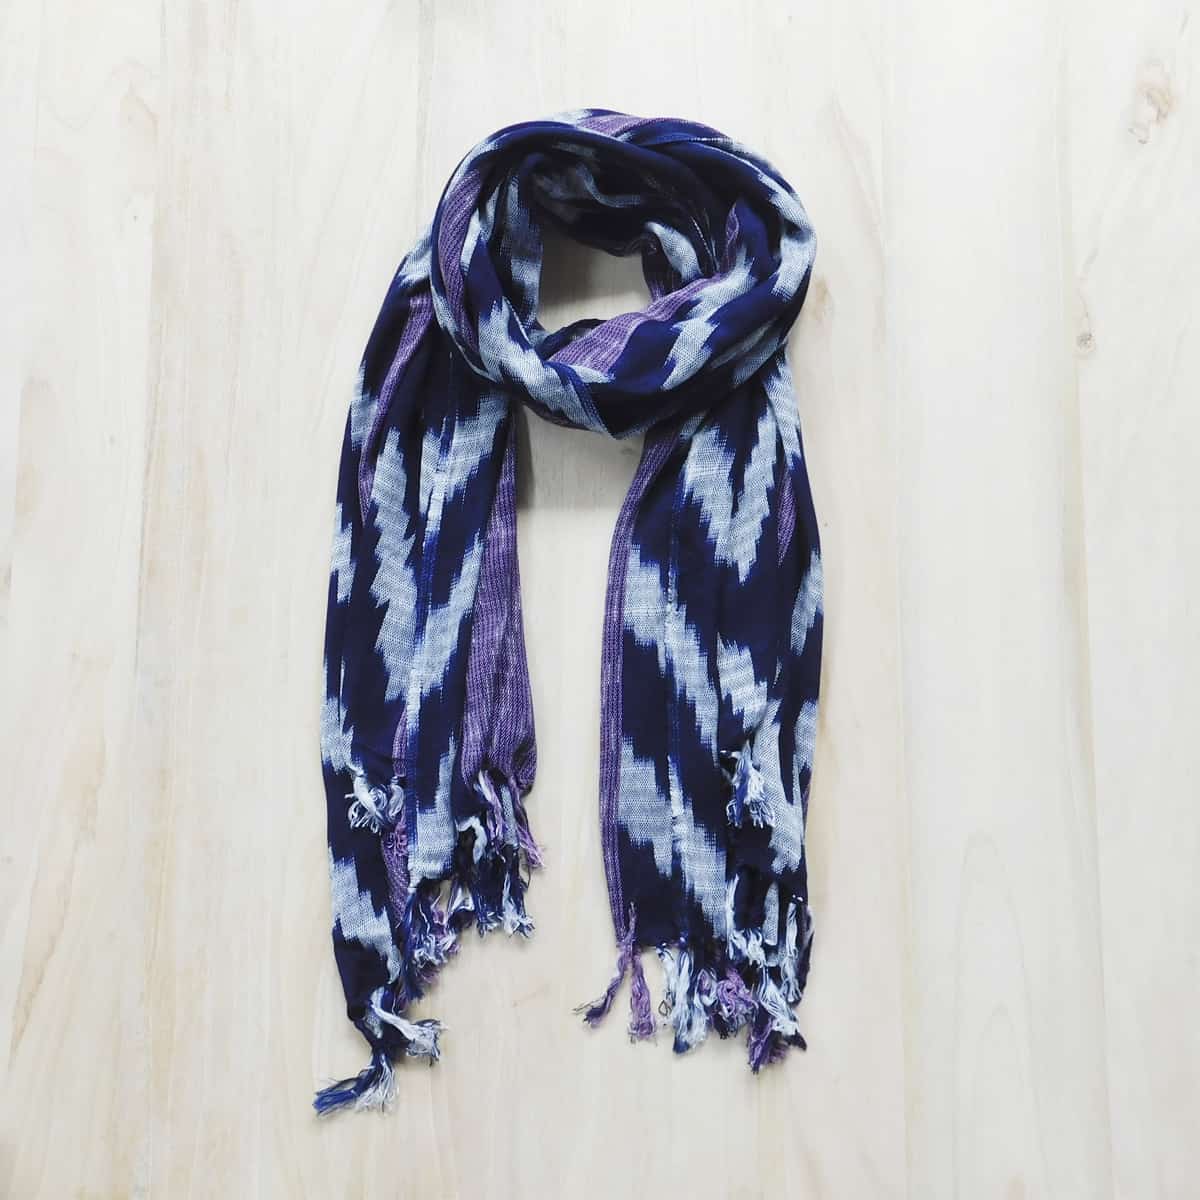 a handwoven guatemalan scarf with navy blue, white and purple stripes in a loop form against a light wood background